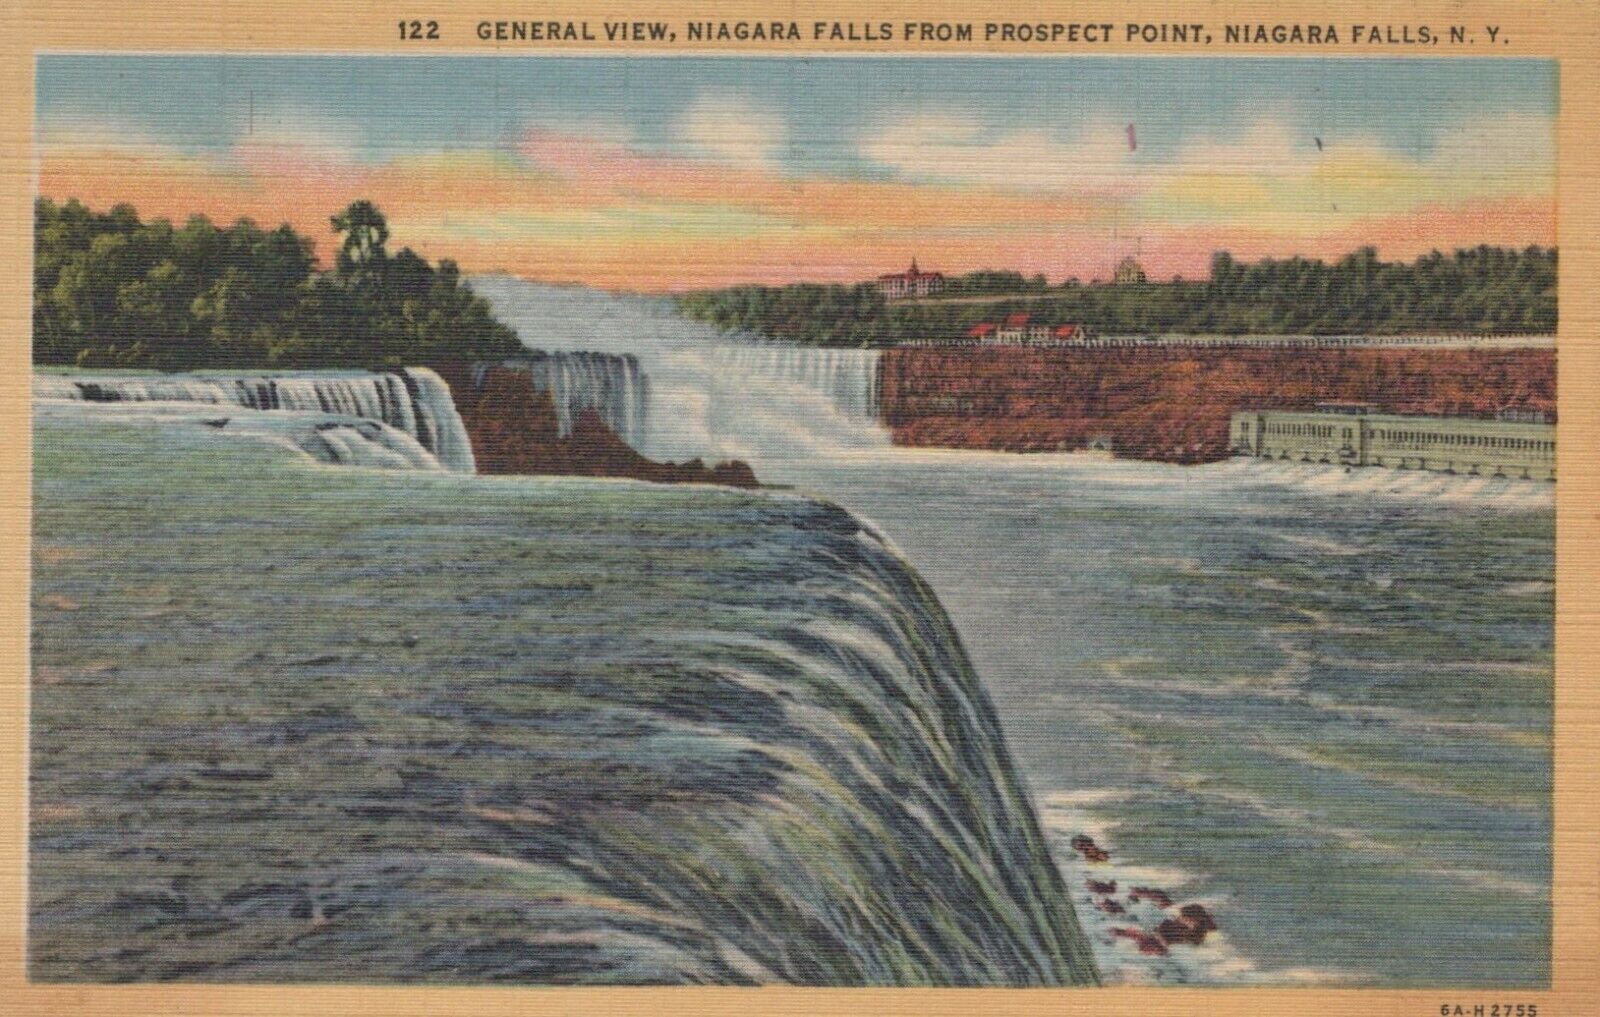 General View Of Niagara Falls Prospect Point NY Posted Vintage Linen Post Card